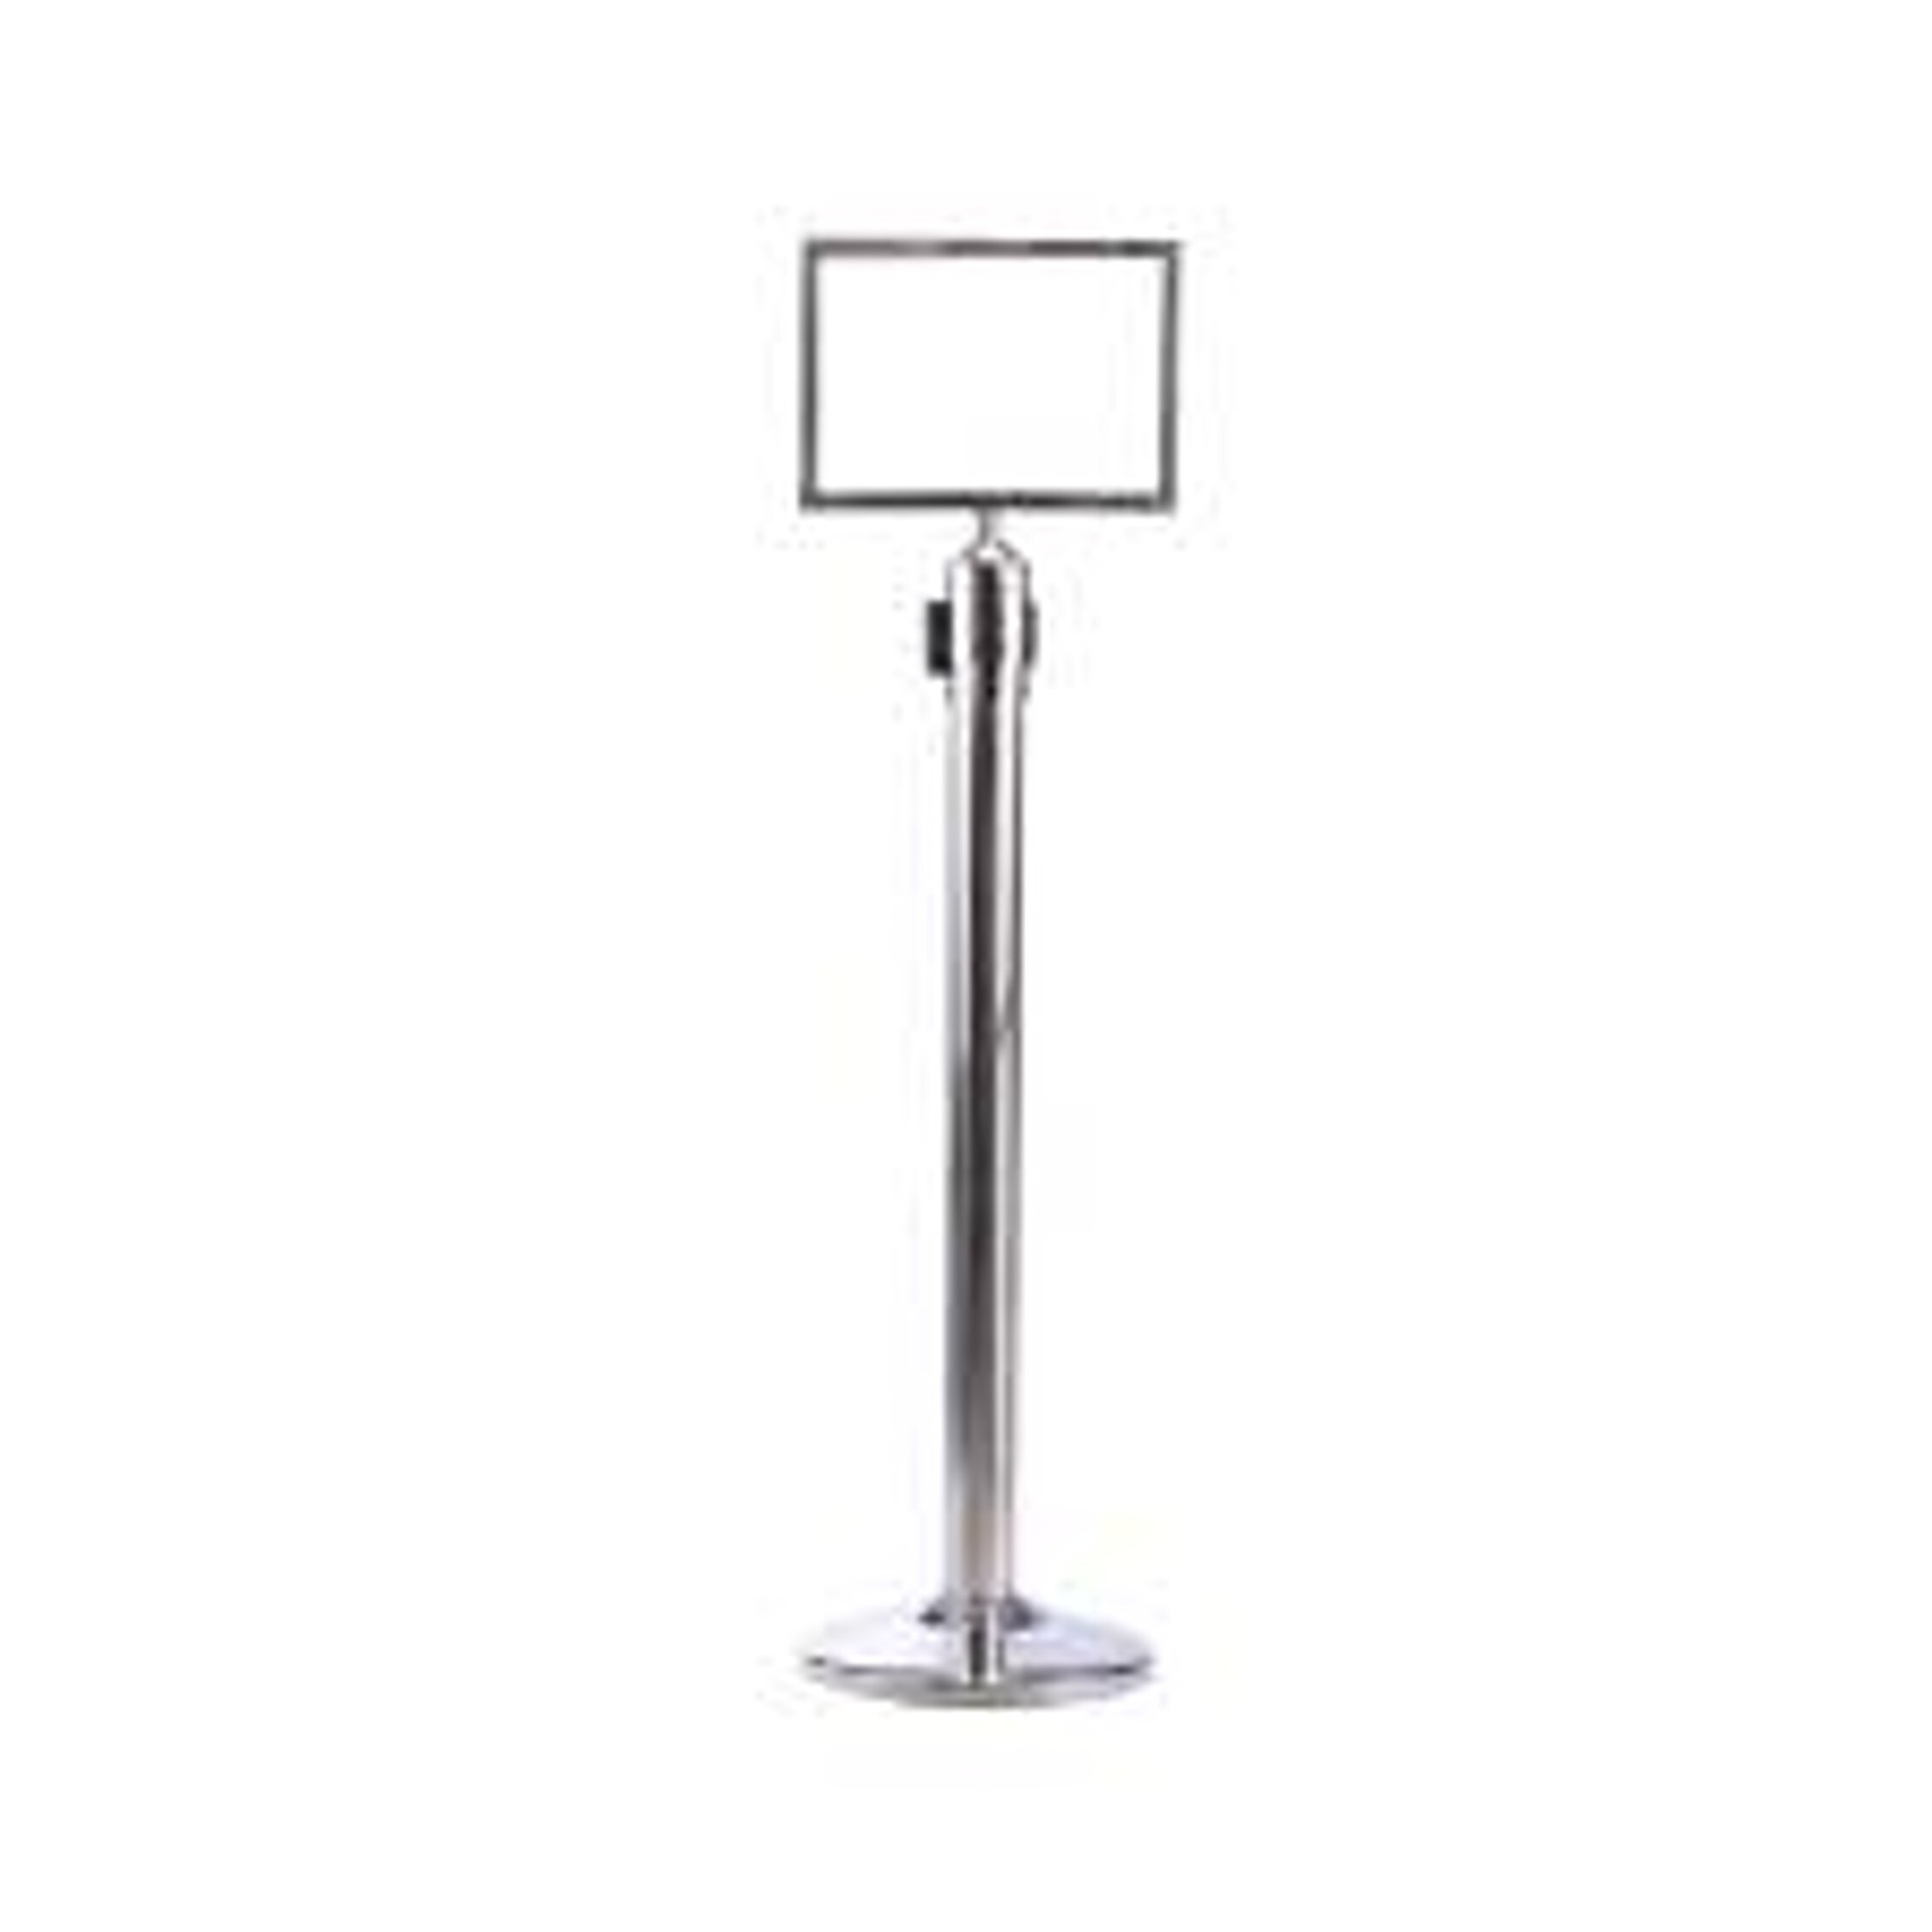 Q Up Stand (Economy Model) OR/QM/01